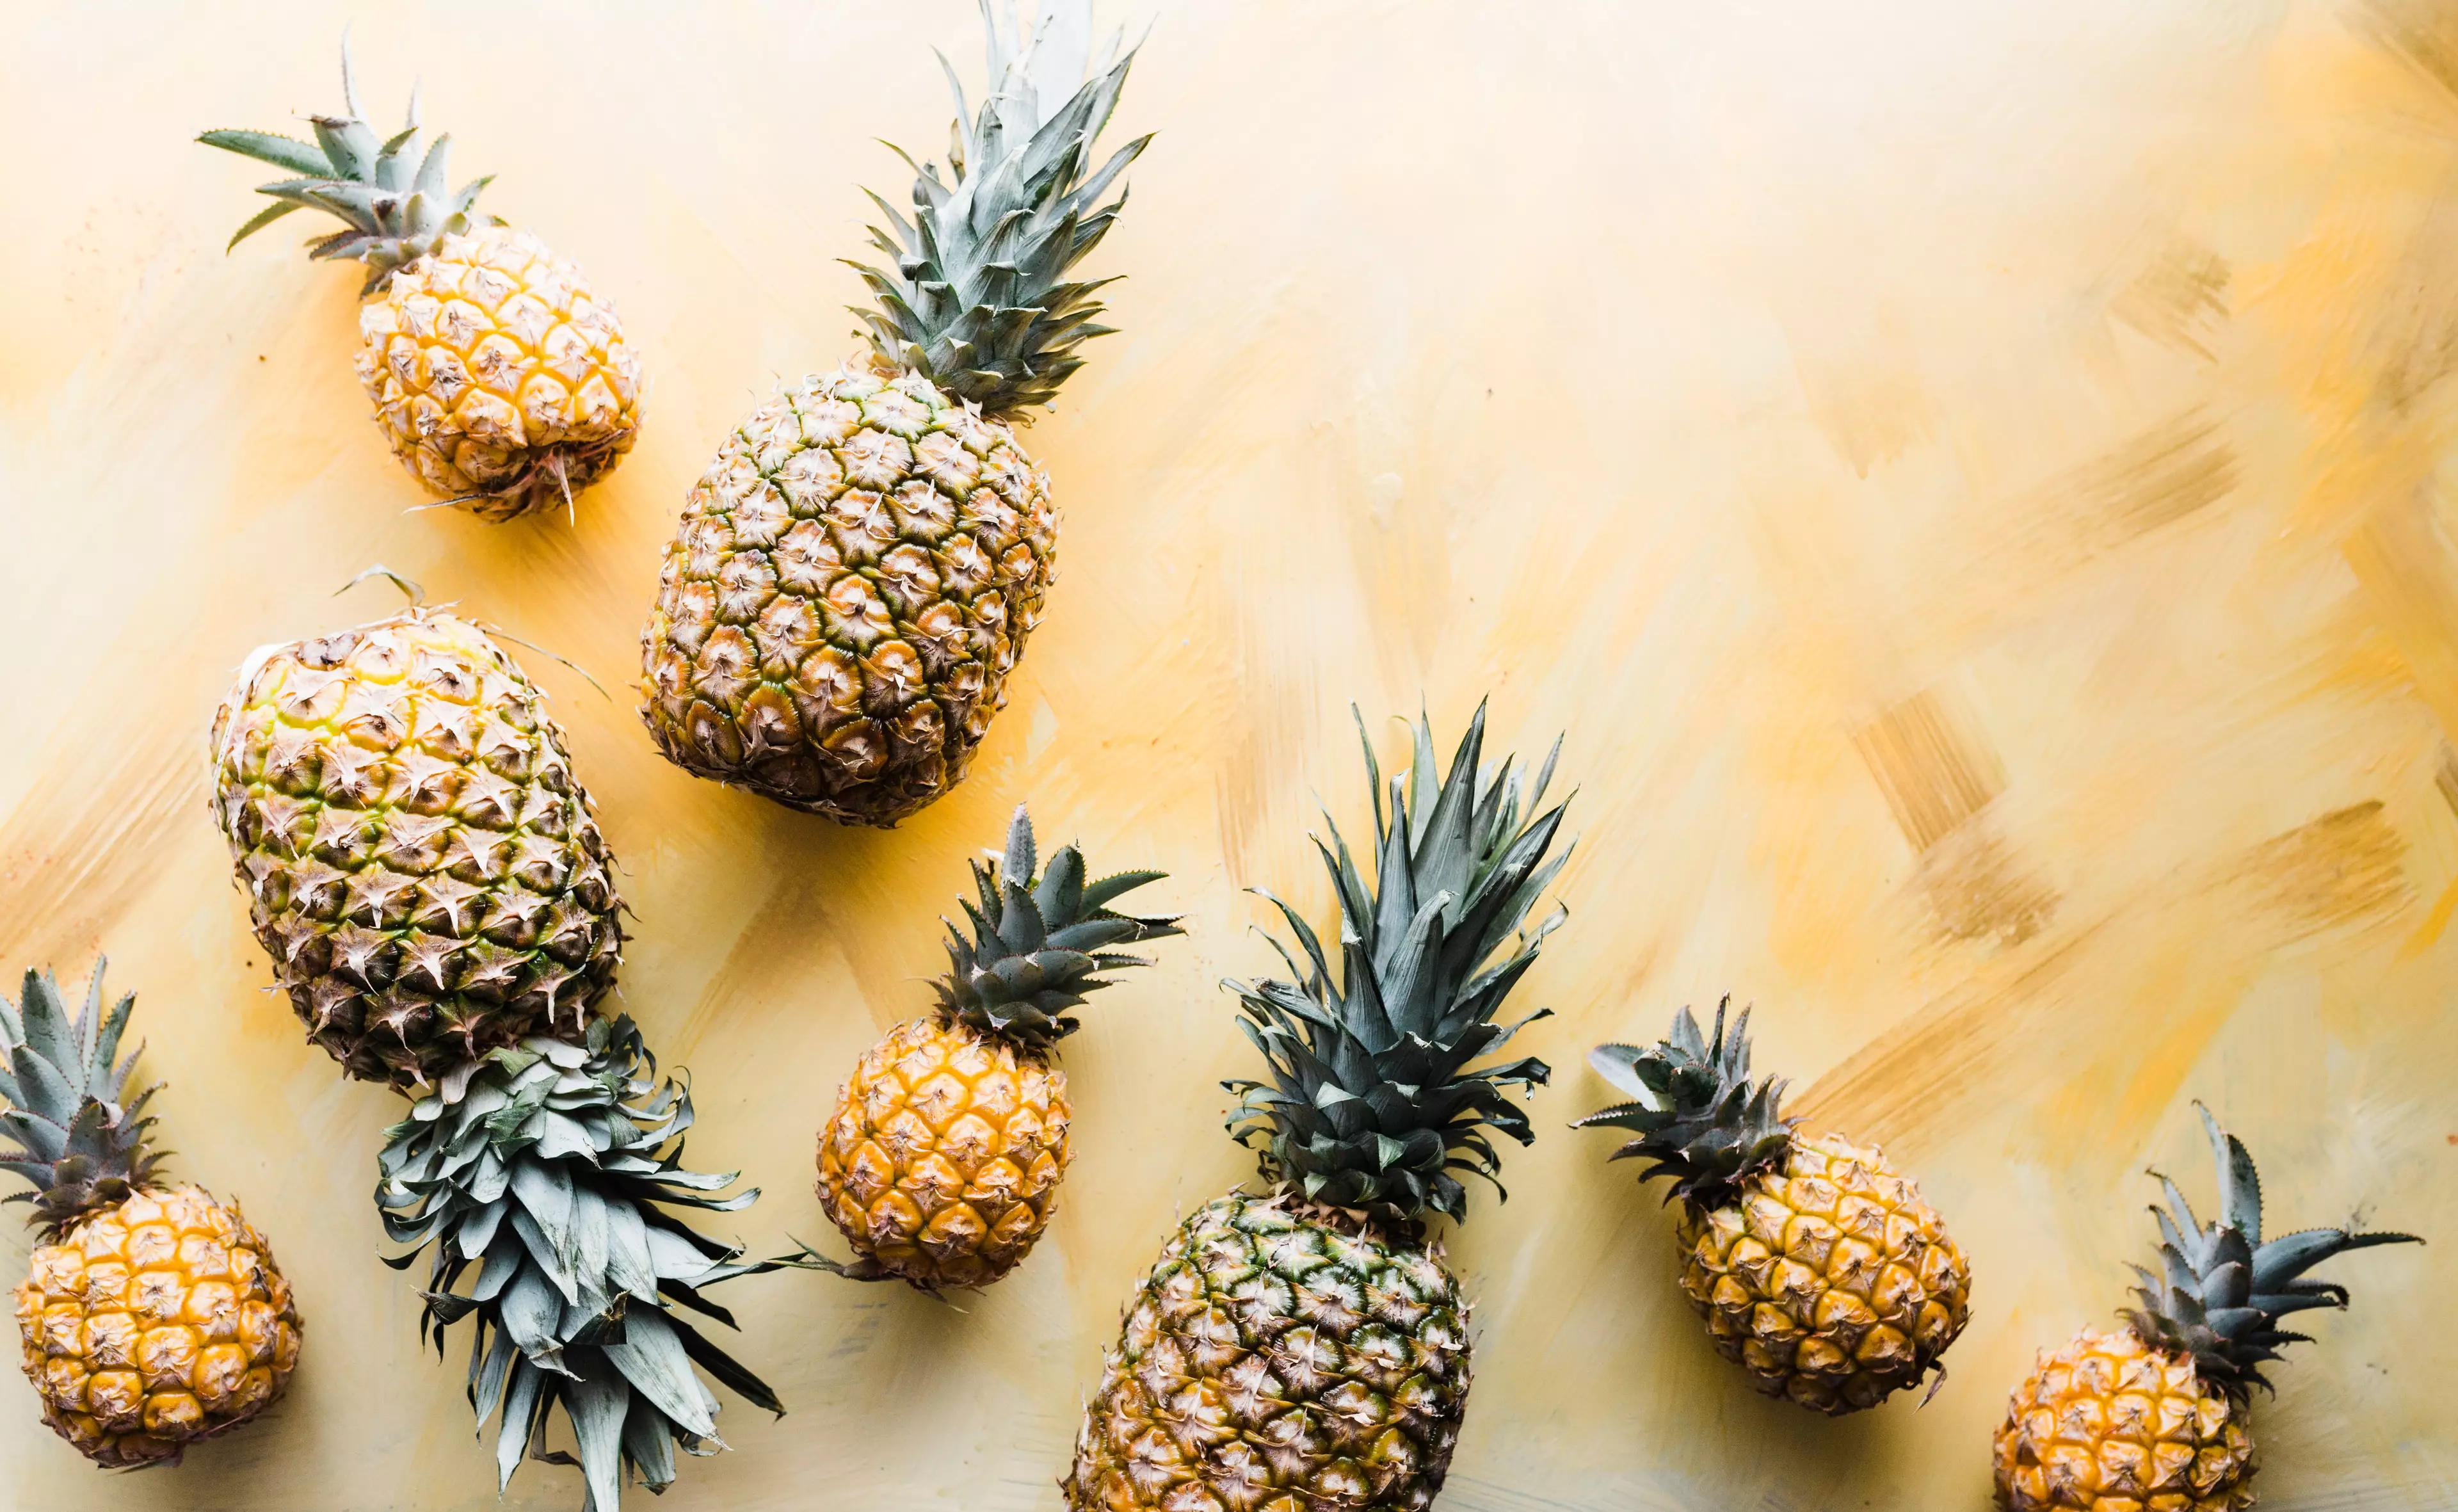 Turns out, pineapple is a real opinion splitter (